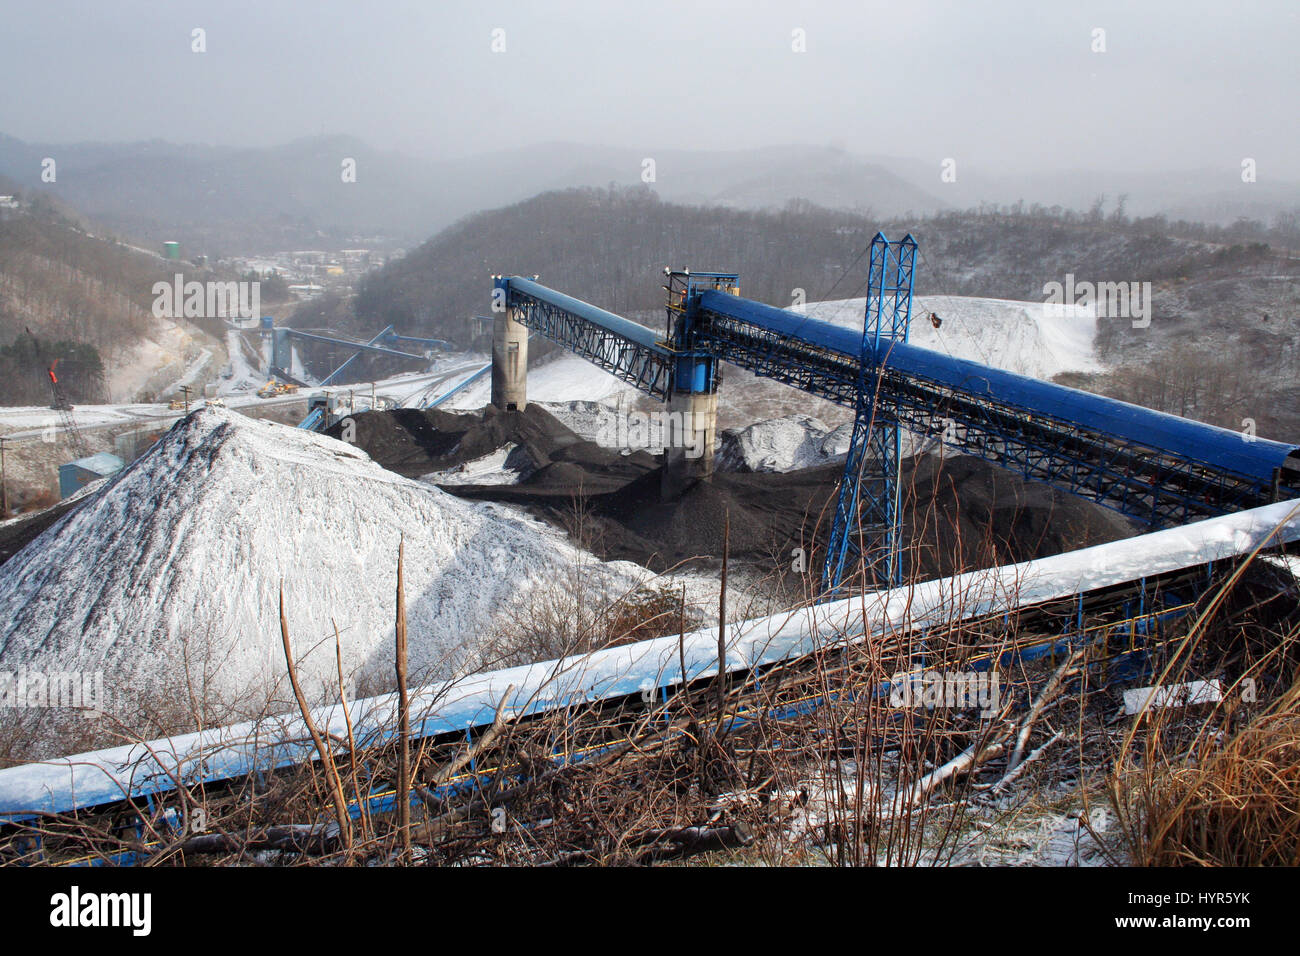 Conveyors carry processed coal to a loading station in Central Appalachia, where the coal industry has remained relevant to the economy for decades. Stock Photo